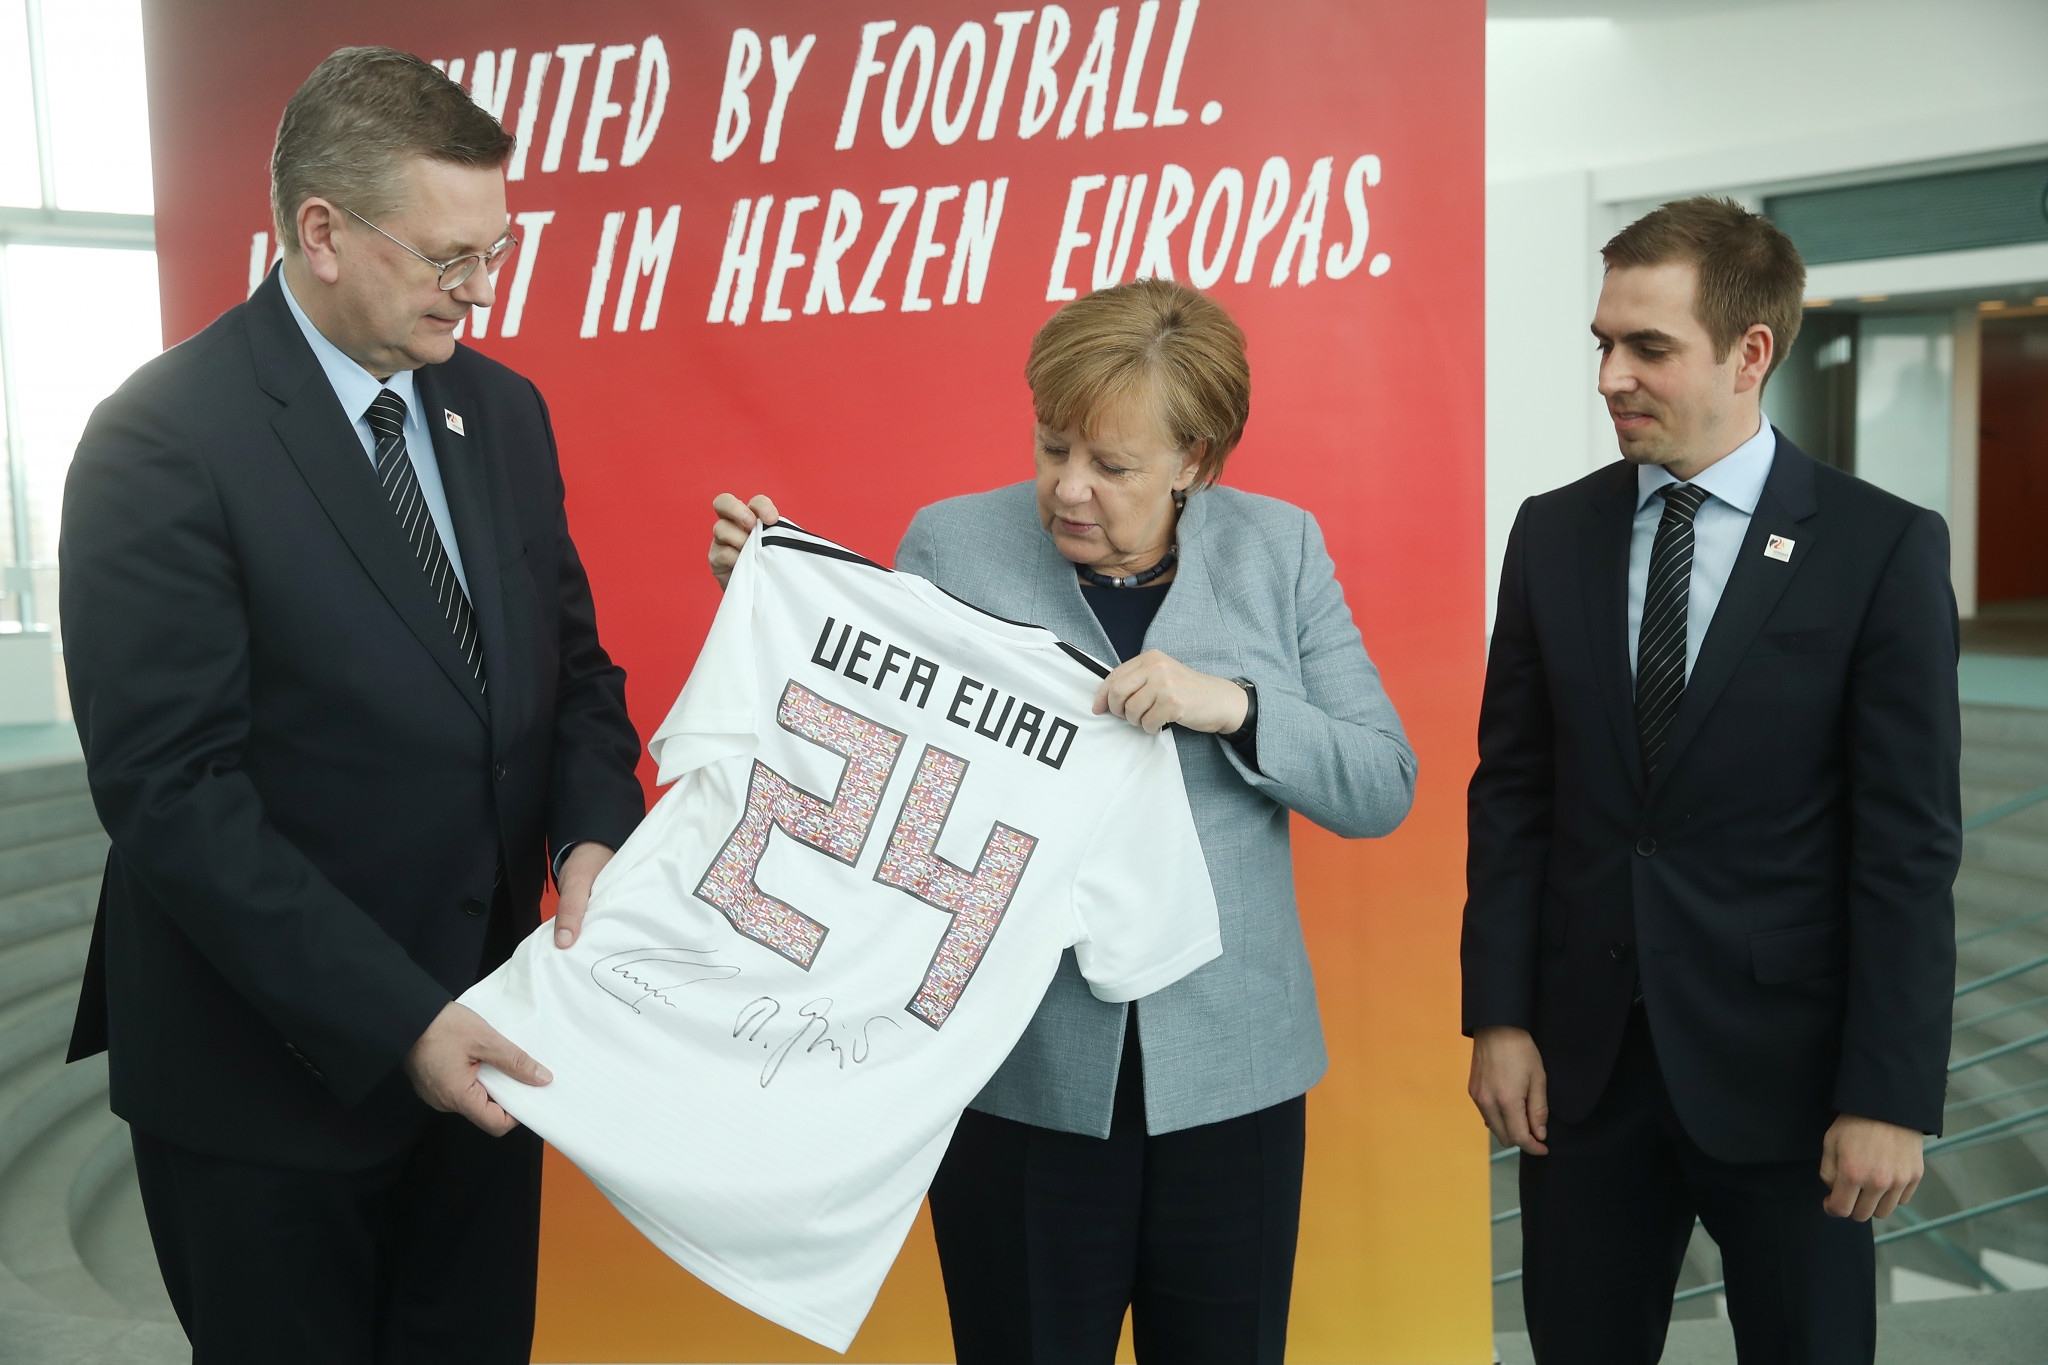 Commercial partnerships of DFB praised by Germany's bid for Euro 2024